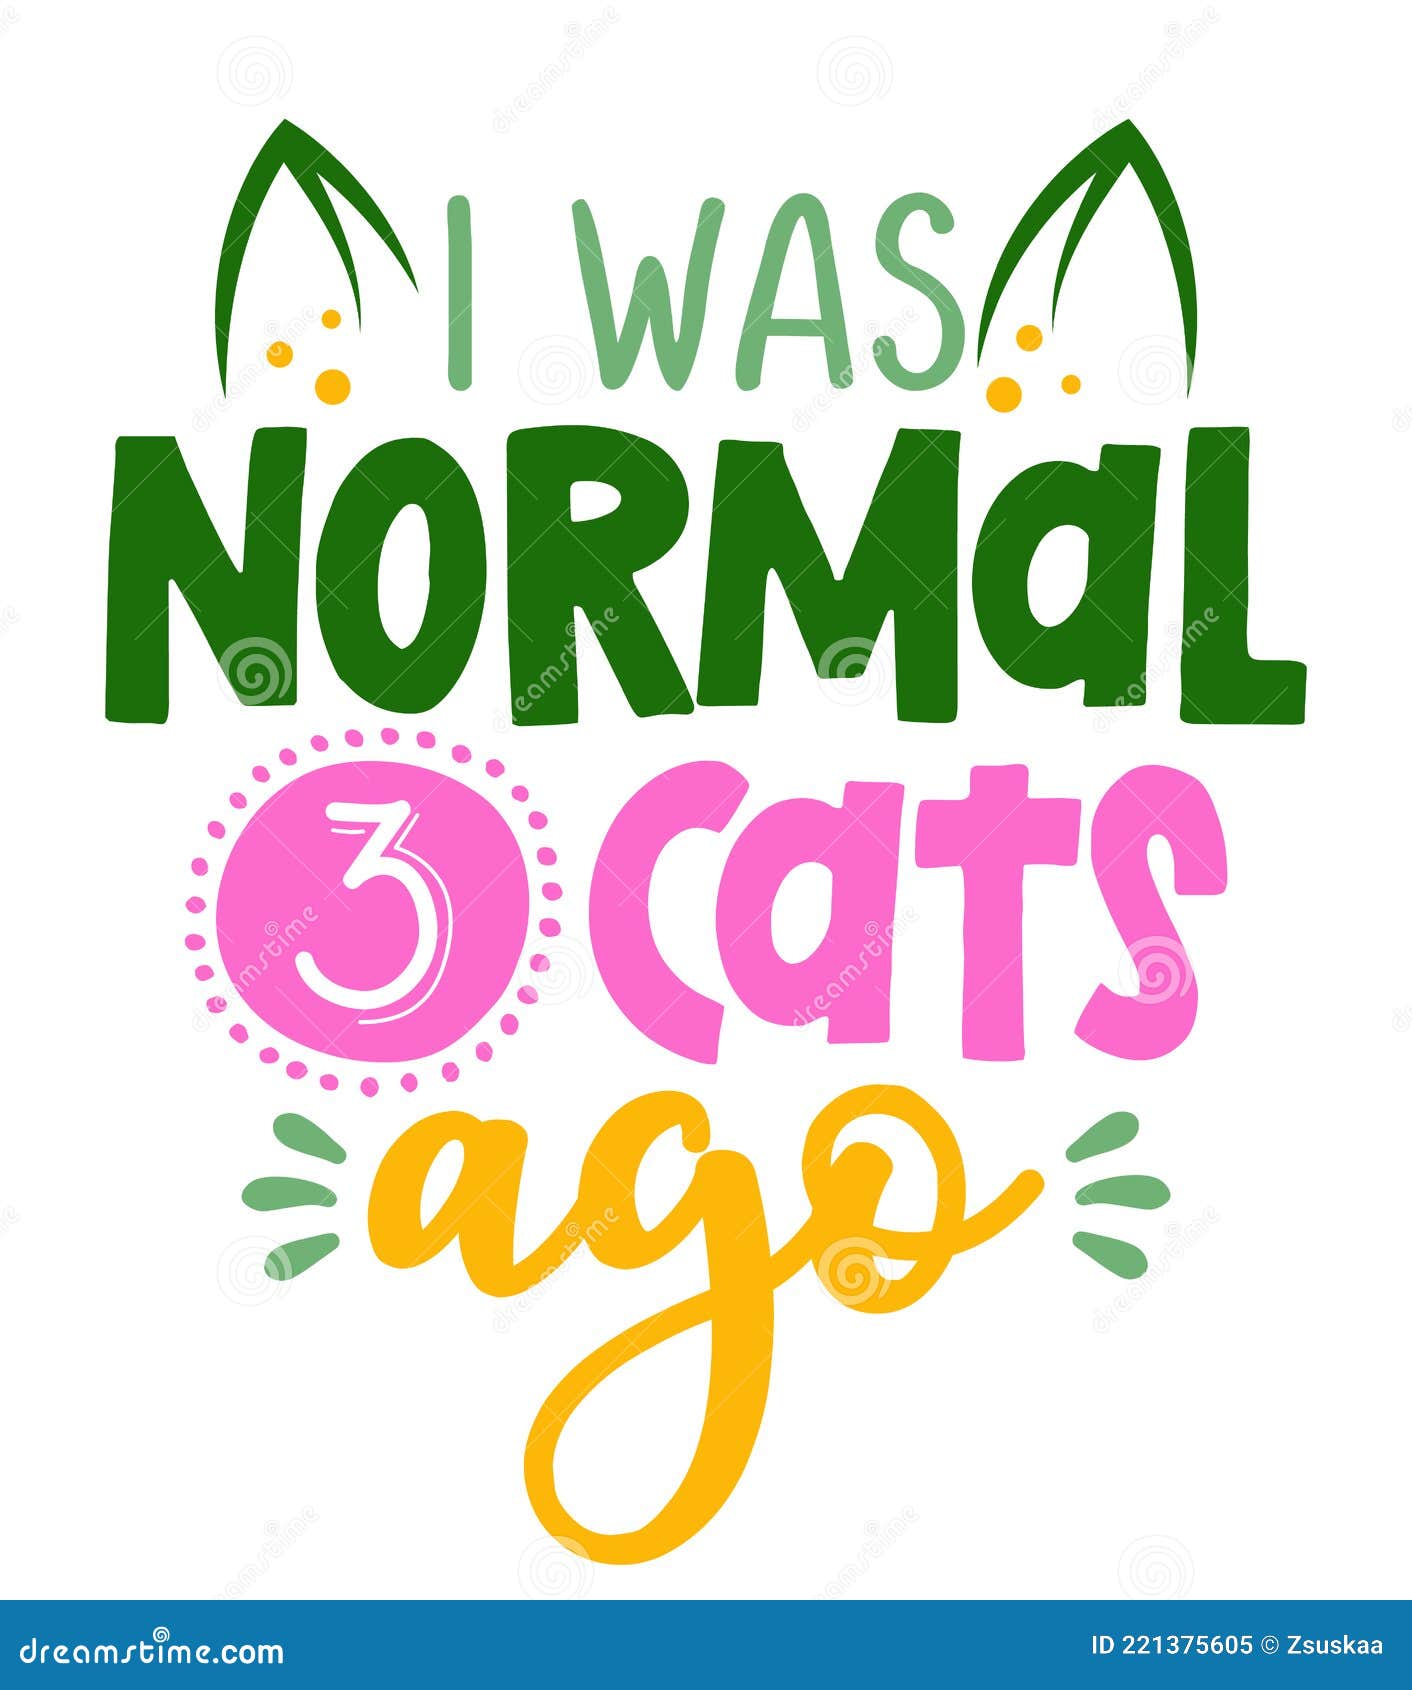 i was normal 3 cats ago - funny hand drawn calligraphy text.